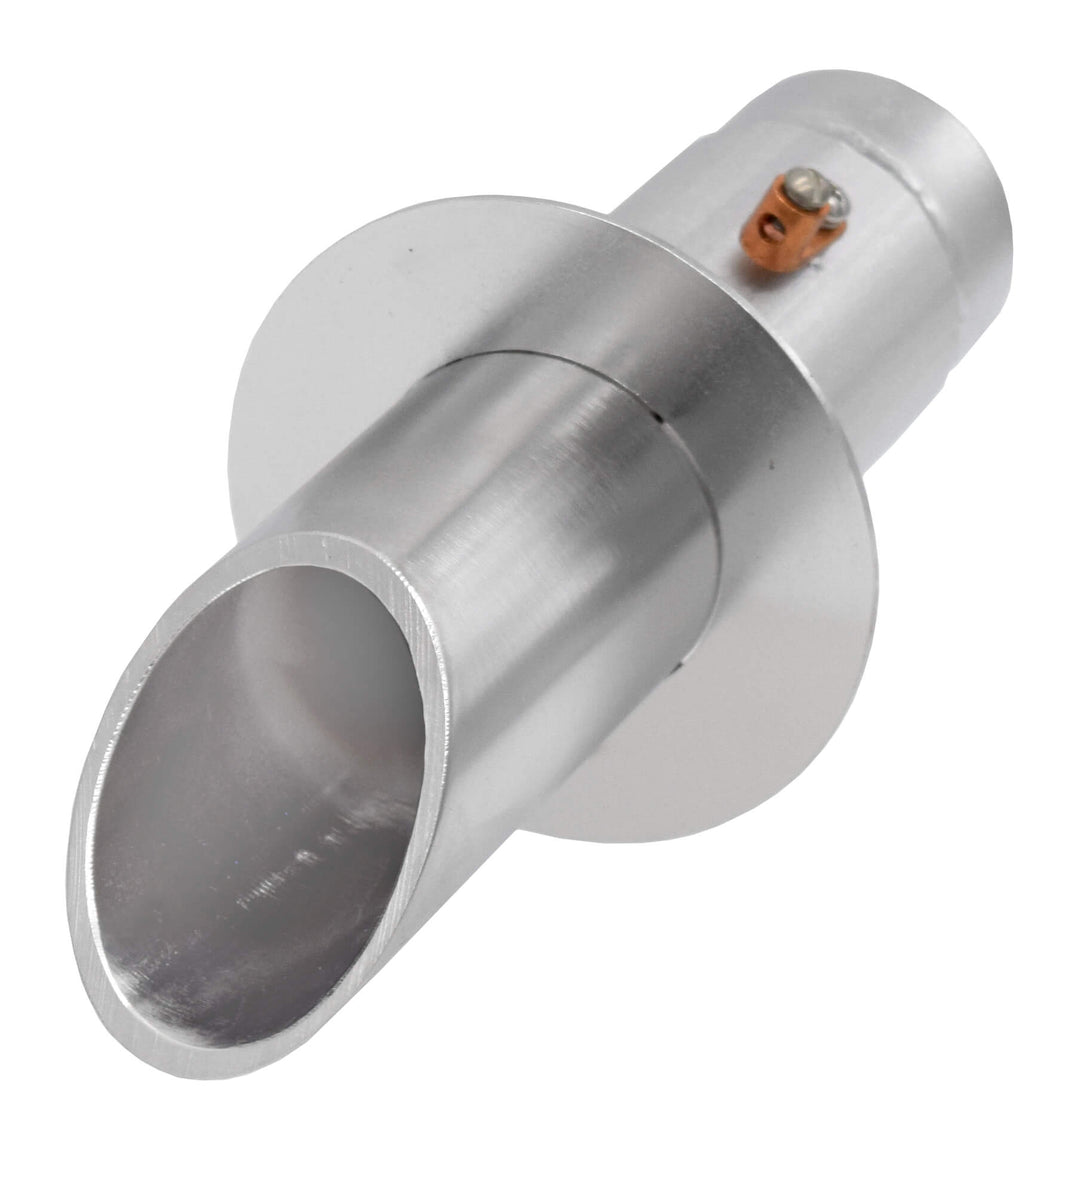 EasyPro Vianti Falls Stainless 2" Round Scupper with round wall plate